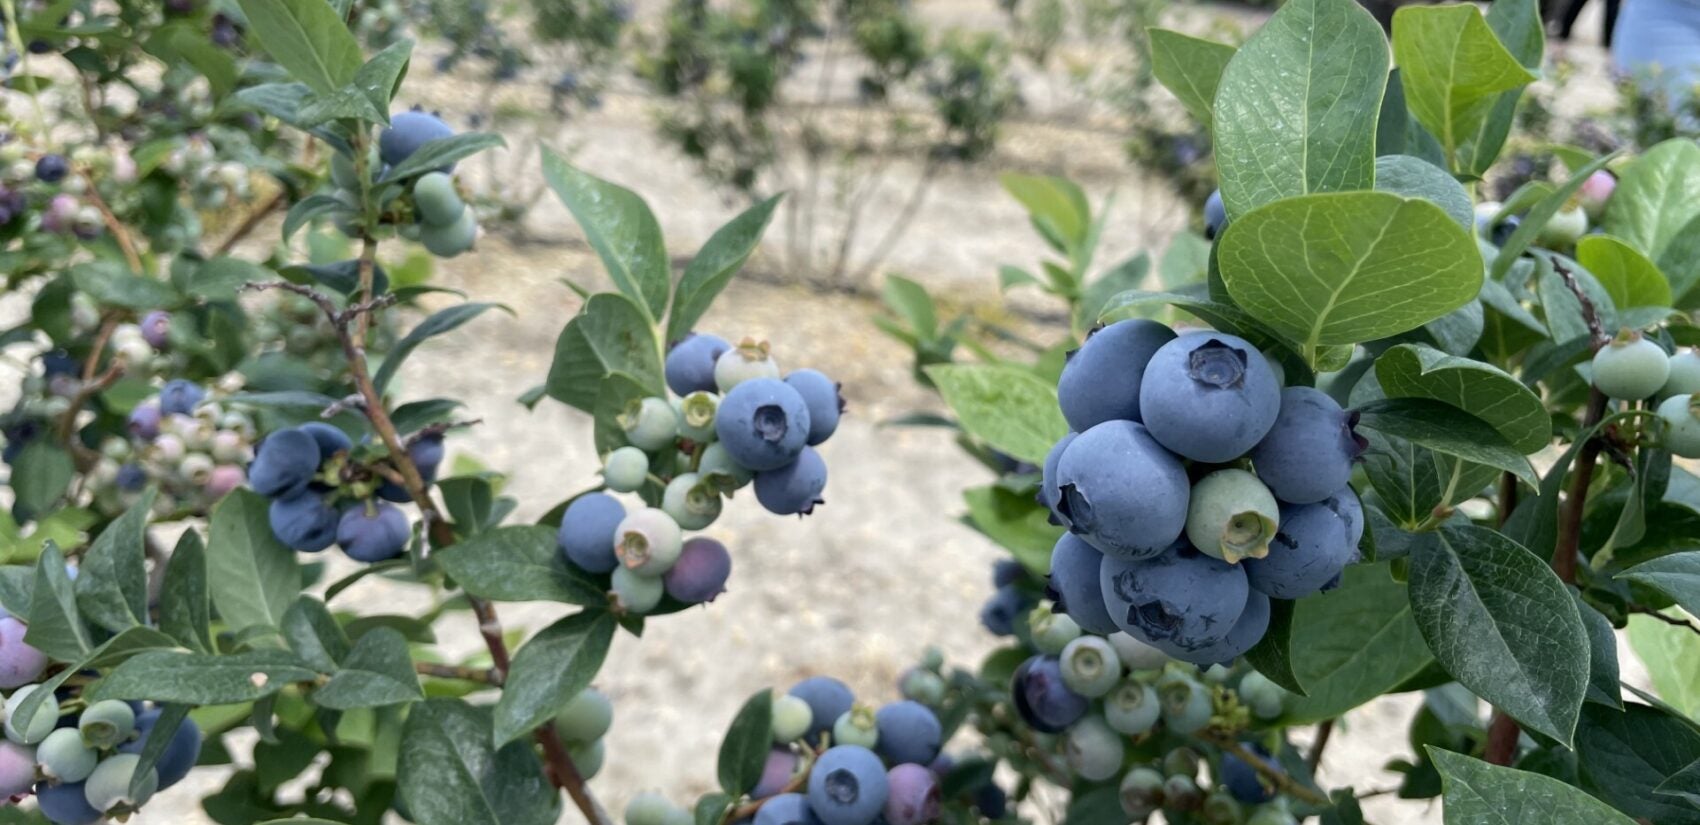 Millions of pounds of blueberries are being harvested in South Jersey. (David Matthau/WHYY)